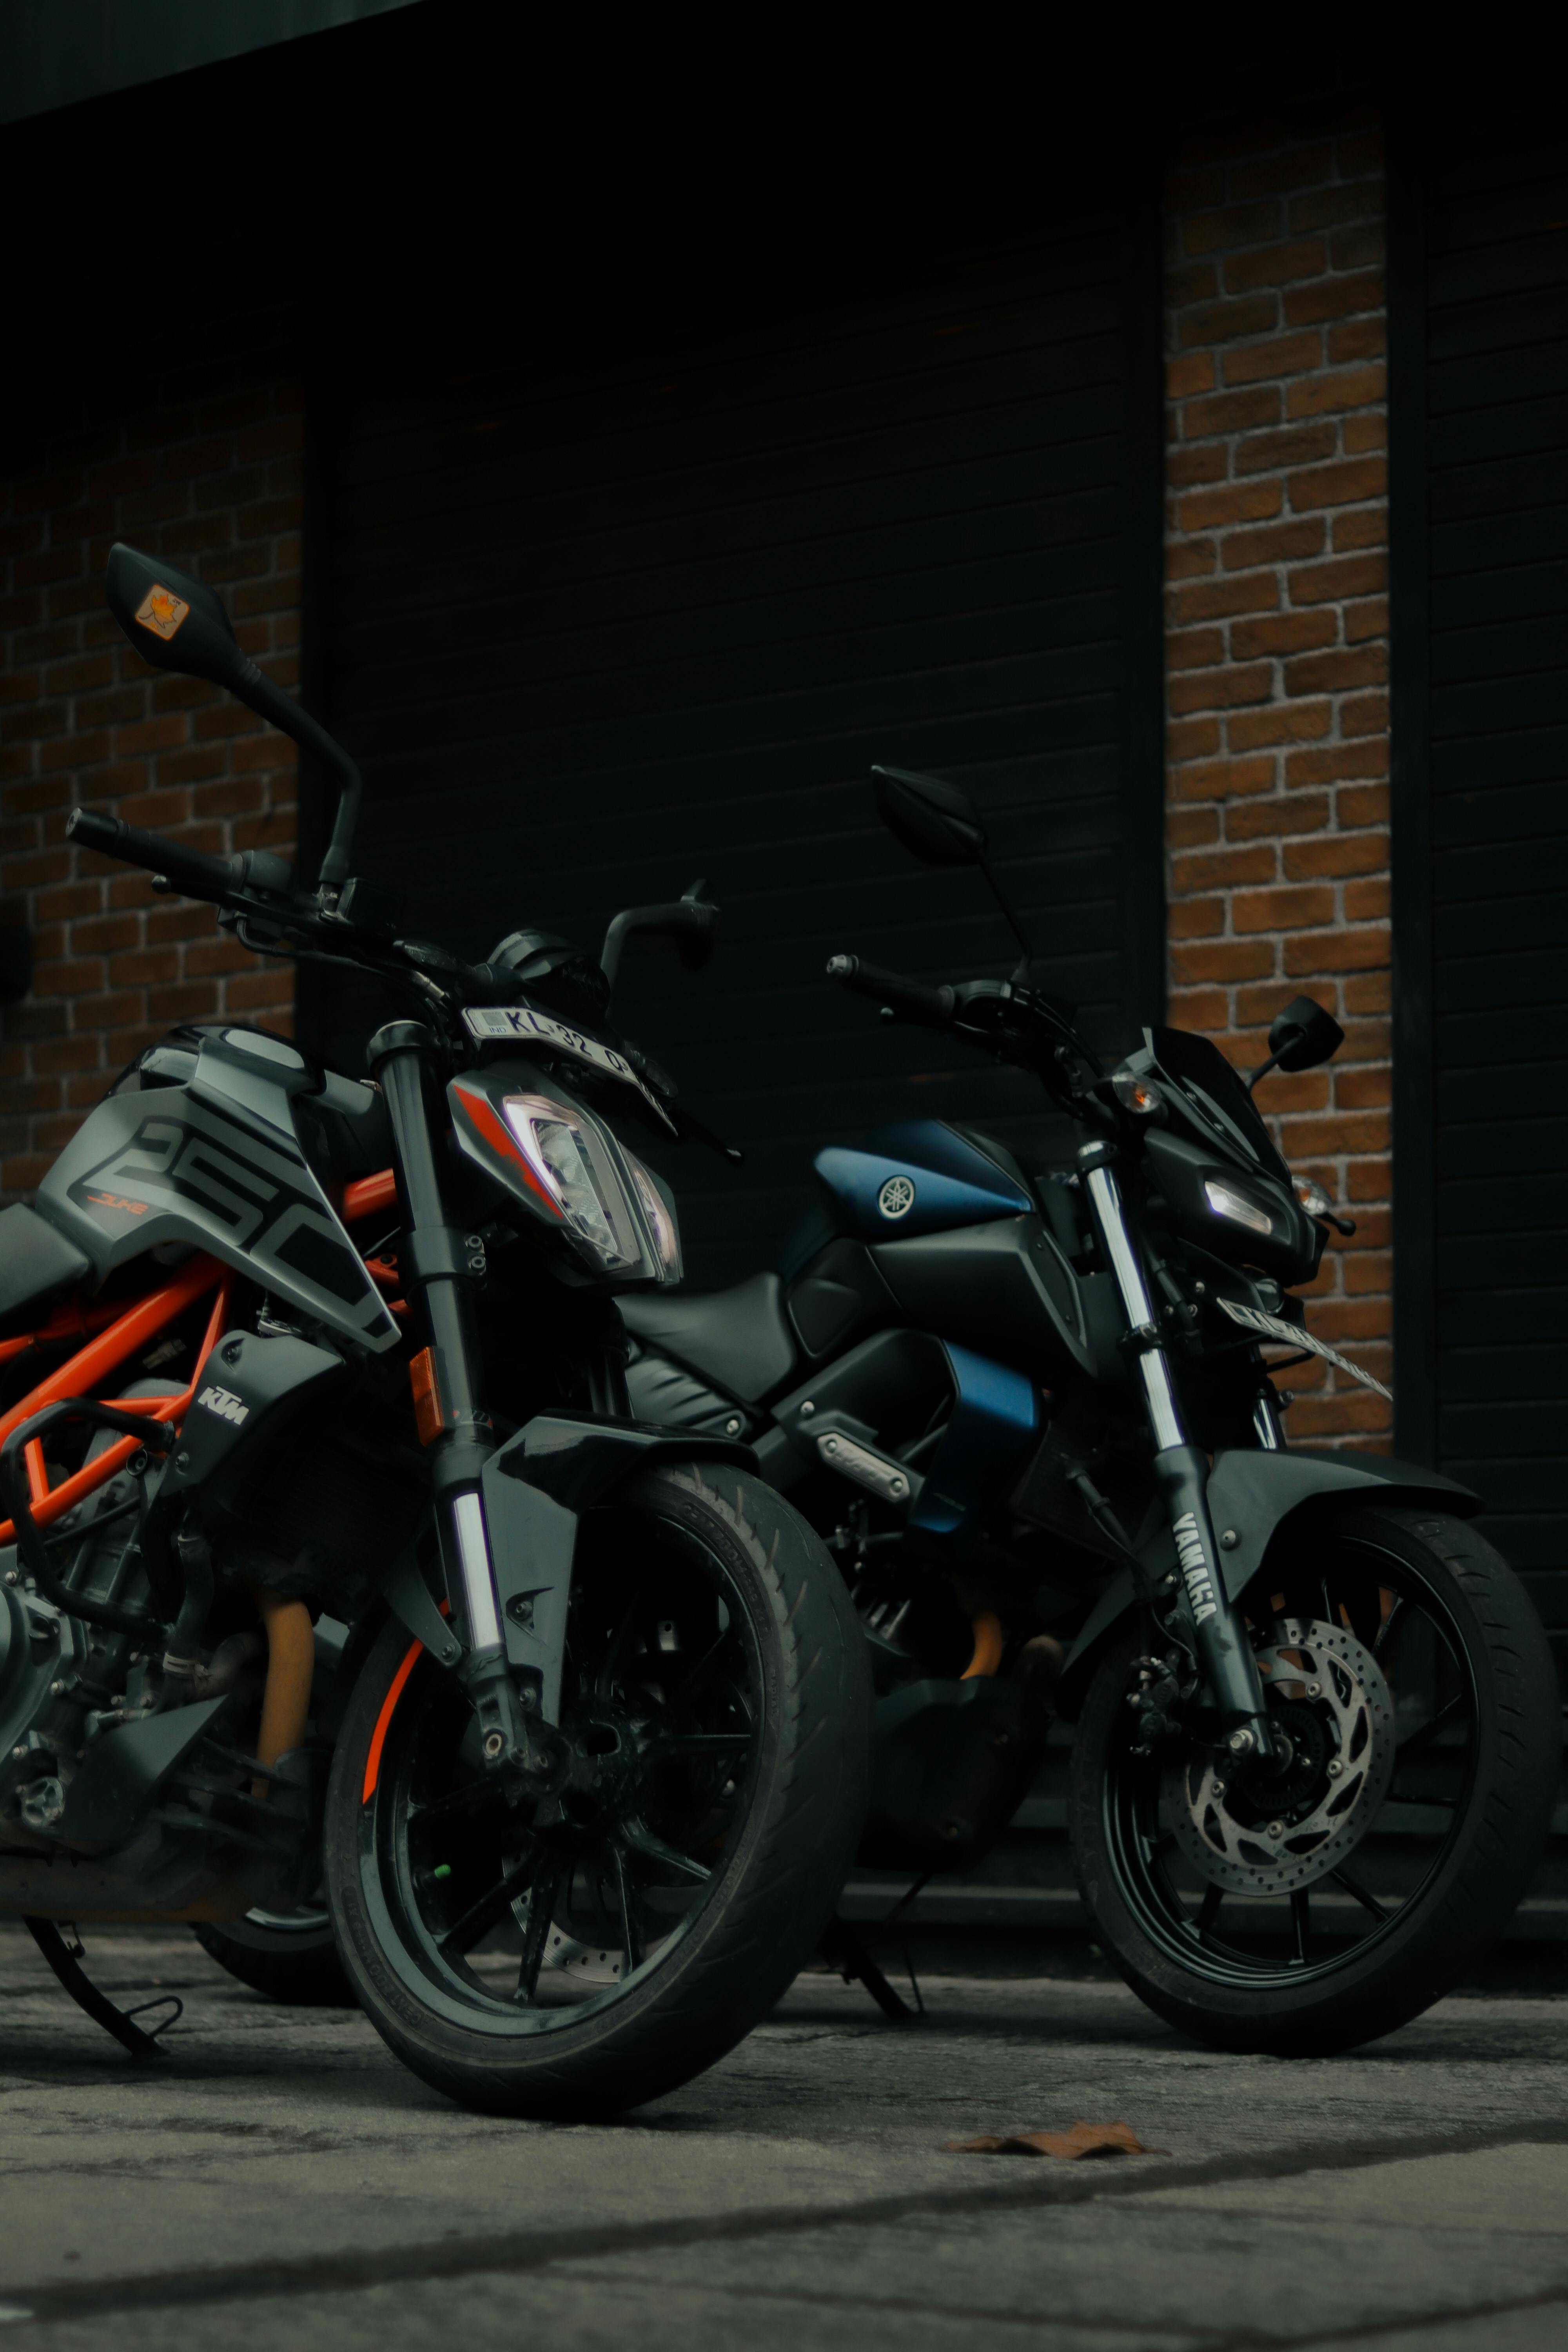 Ktm 125 Photos, Download The BEST Free Ktm 125 Stock Photos & HD Images